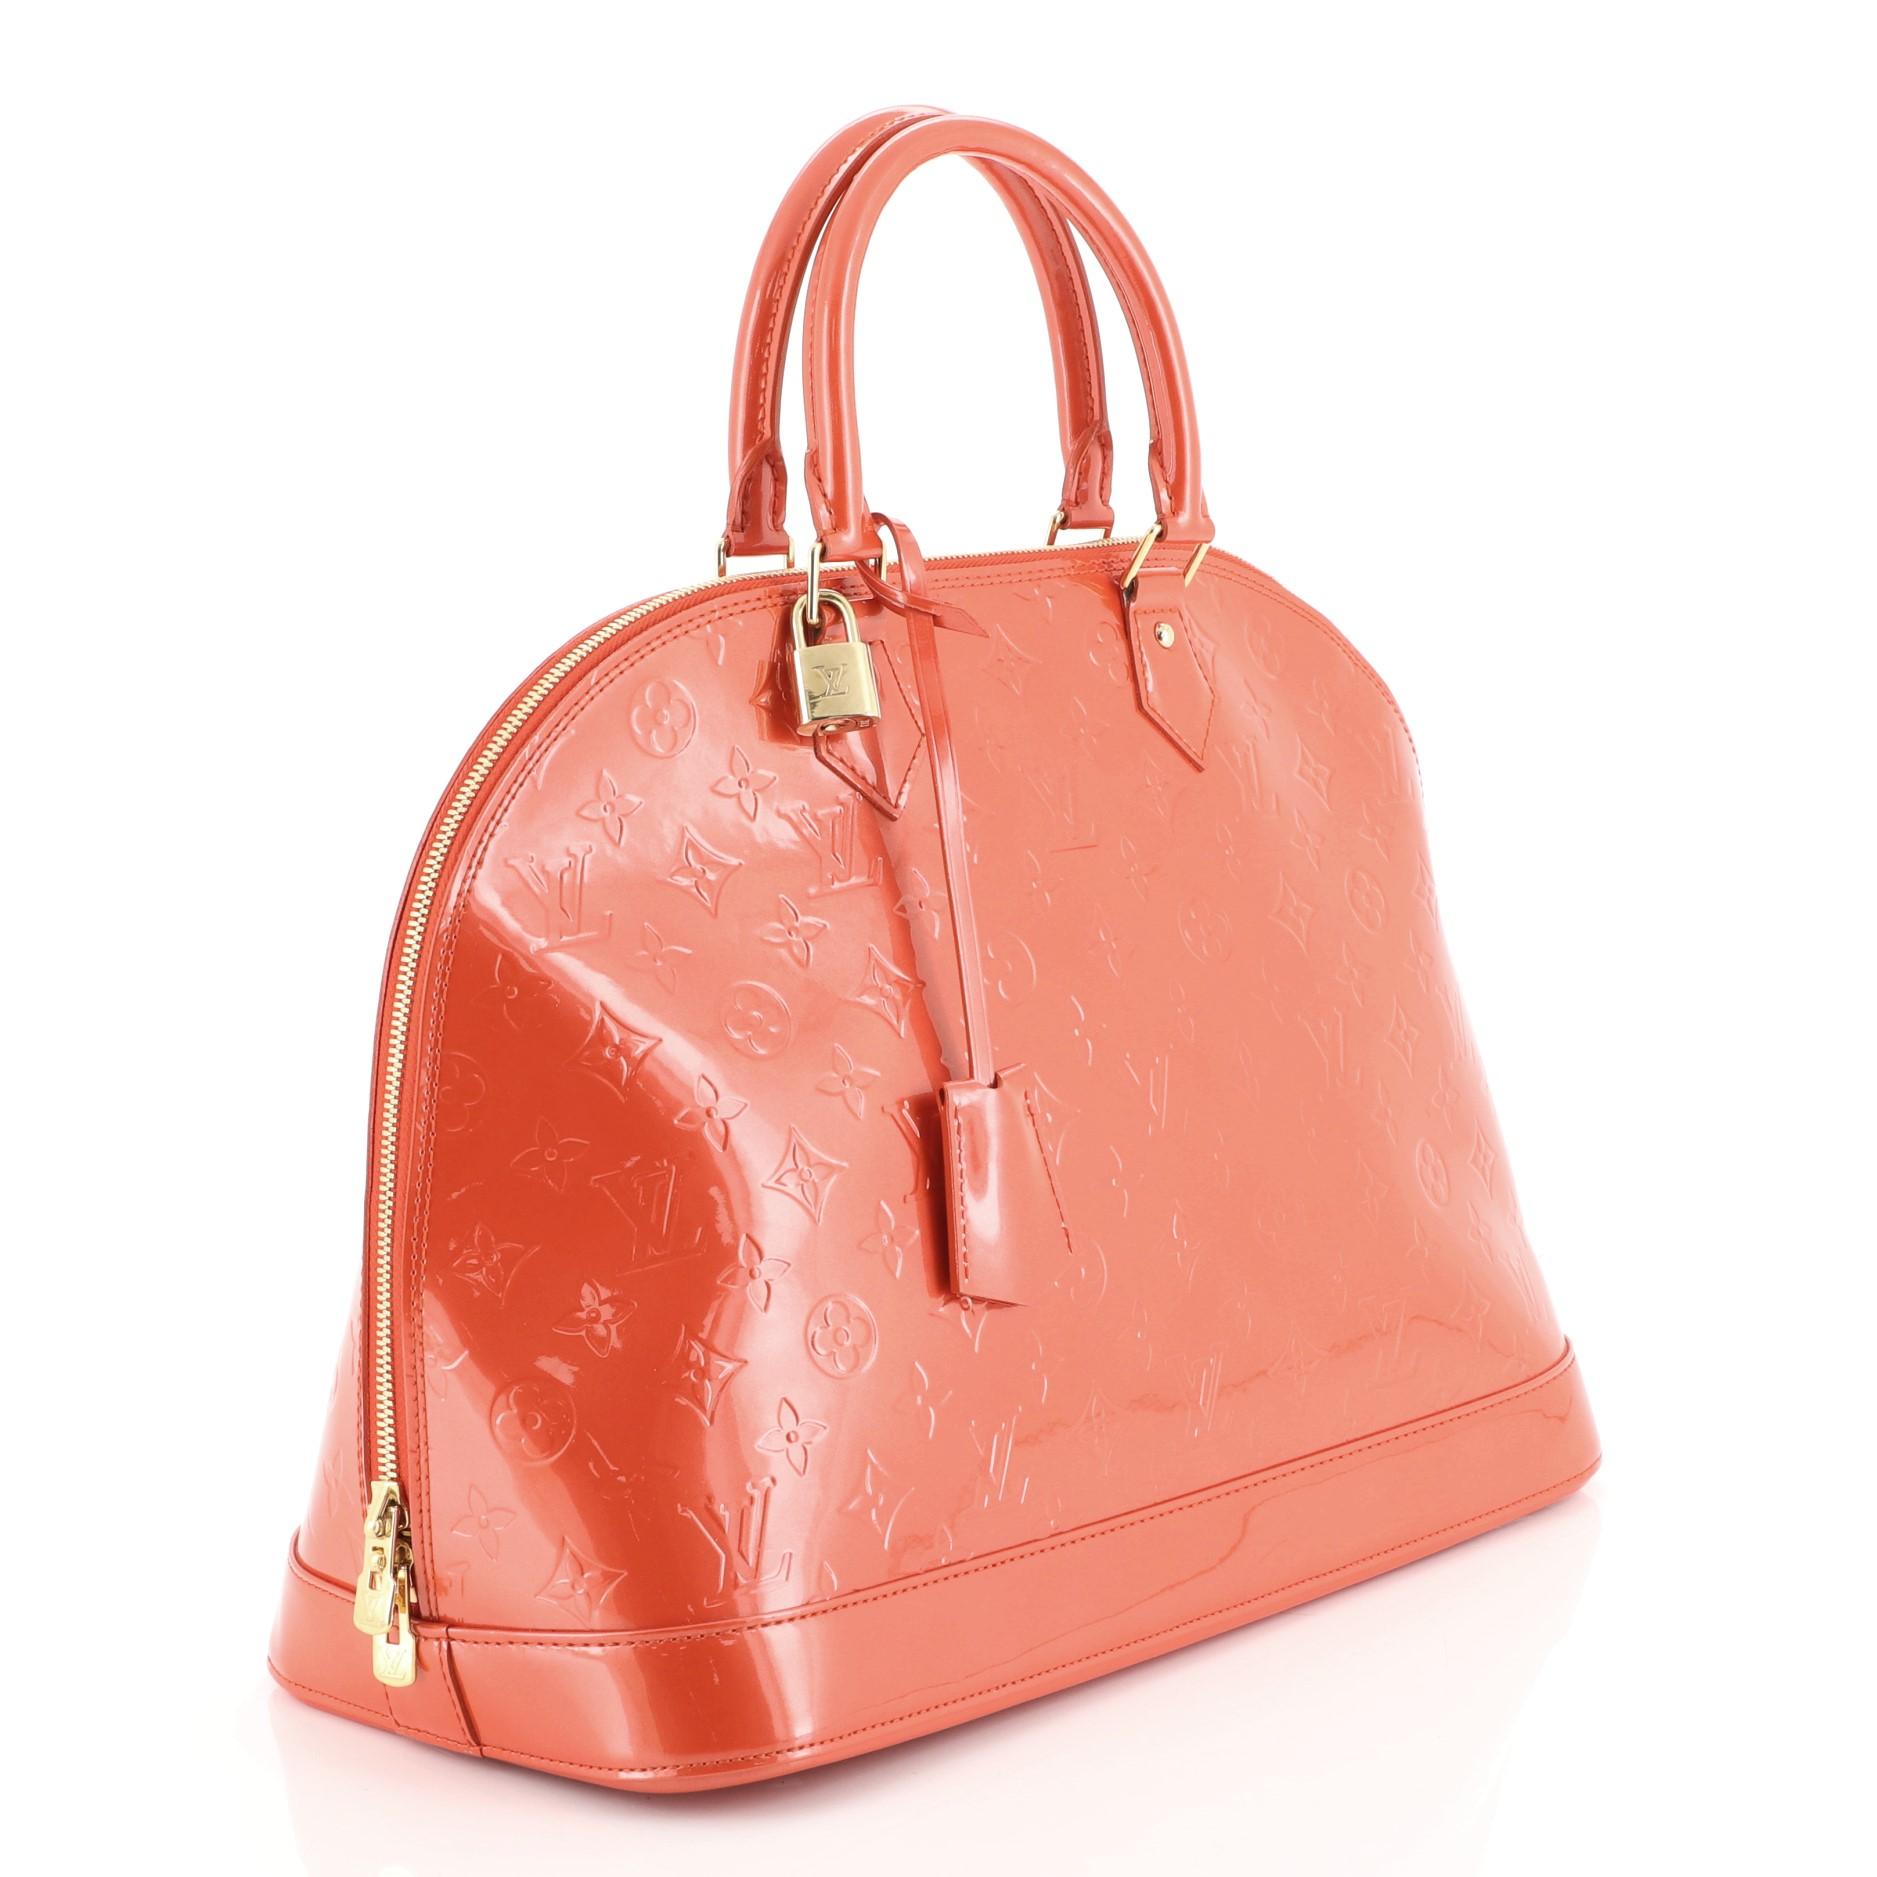 This Louis Vuitton Alma Handbag Monogram Vernis MM, crafted in orange monogram vernis leather, features dual rolled leather handles, protective base studs, and gold-tone hardware. Its zip closure opens to an orange fabric interior with slip pocket.